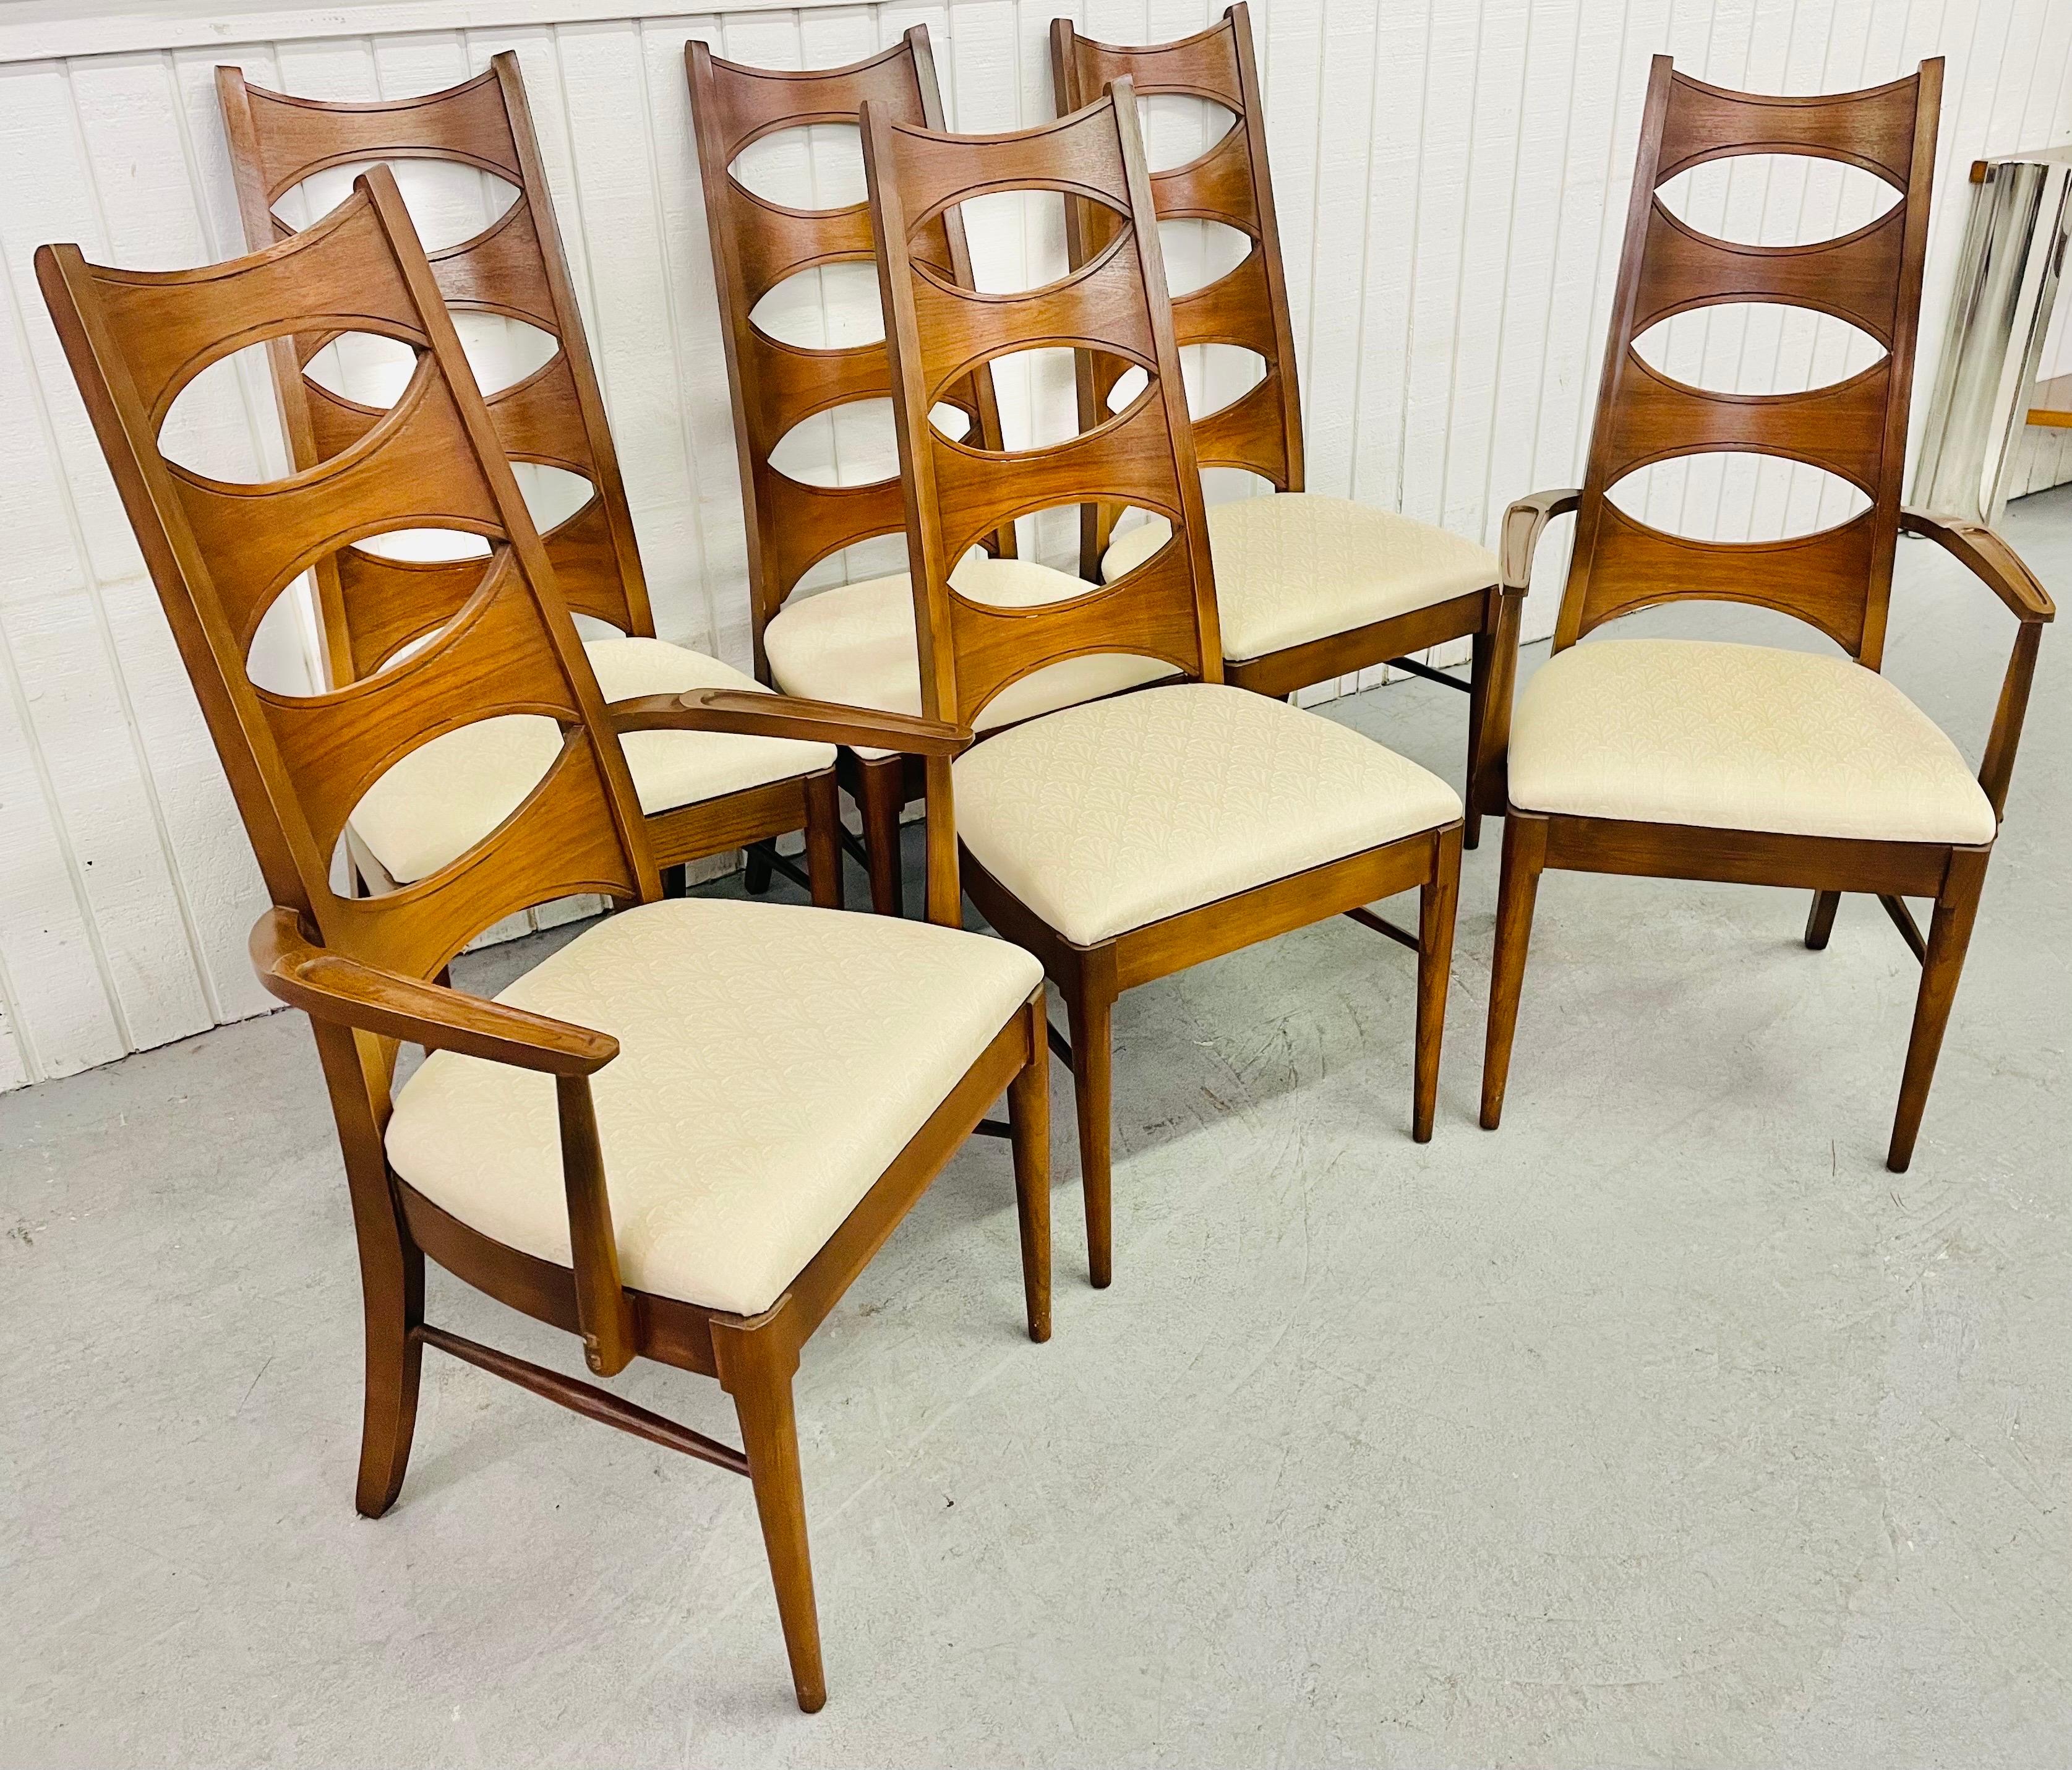 This listing is for a set of six Mid-Century Kent Coffey Perspecta Cats-Eye Walnut dining chairs. Featuring two arm chairs, four straight chairs, a cats-eye design, original off-white upholstery, and a beautiful walnut finish.